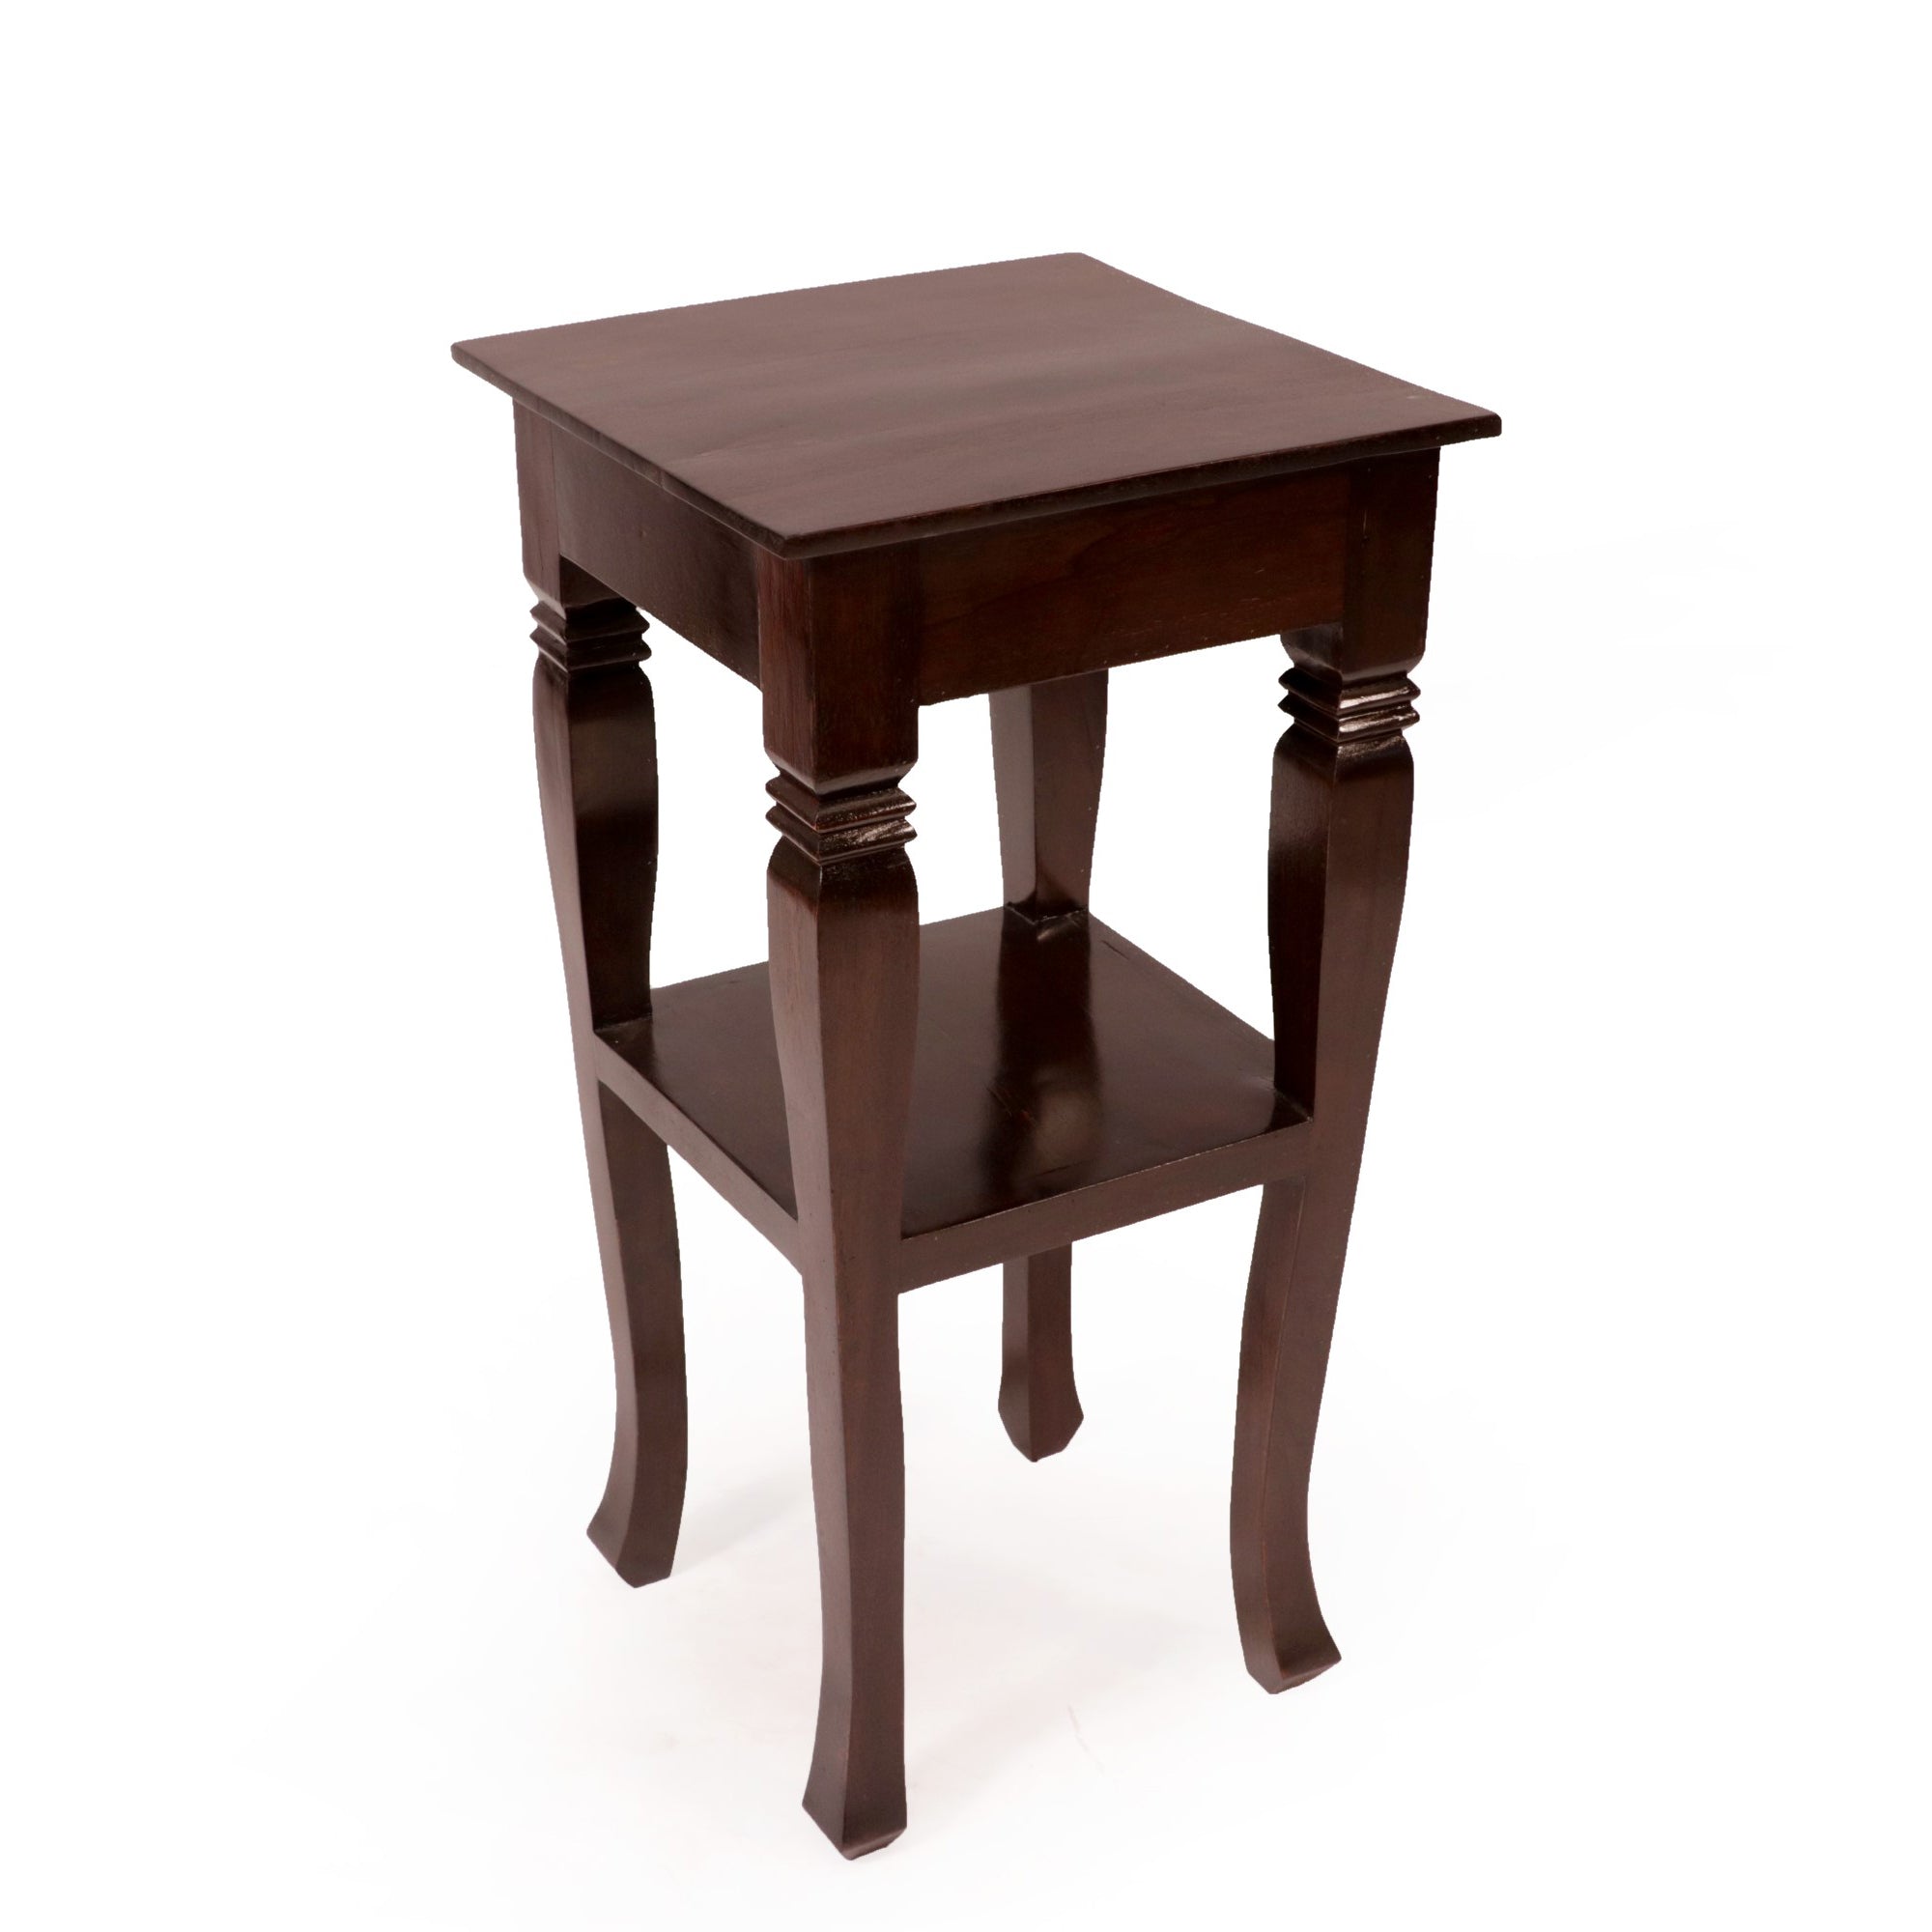 Double Tiered Wooden Stand End Table